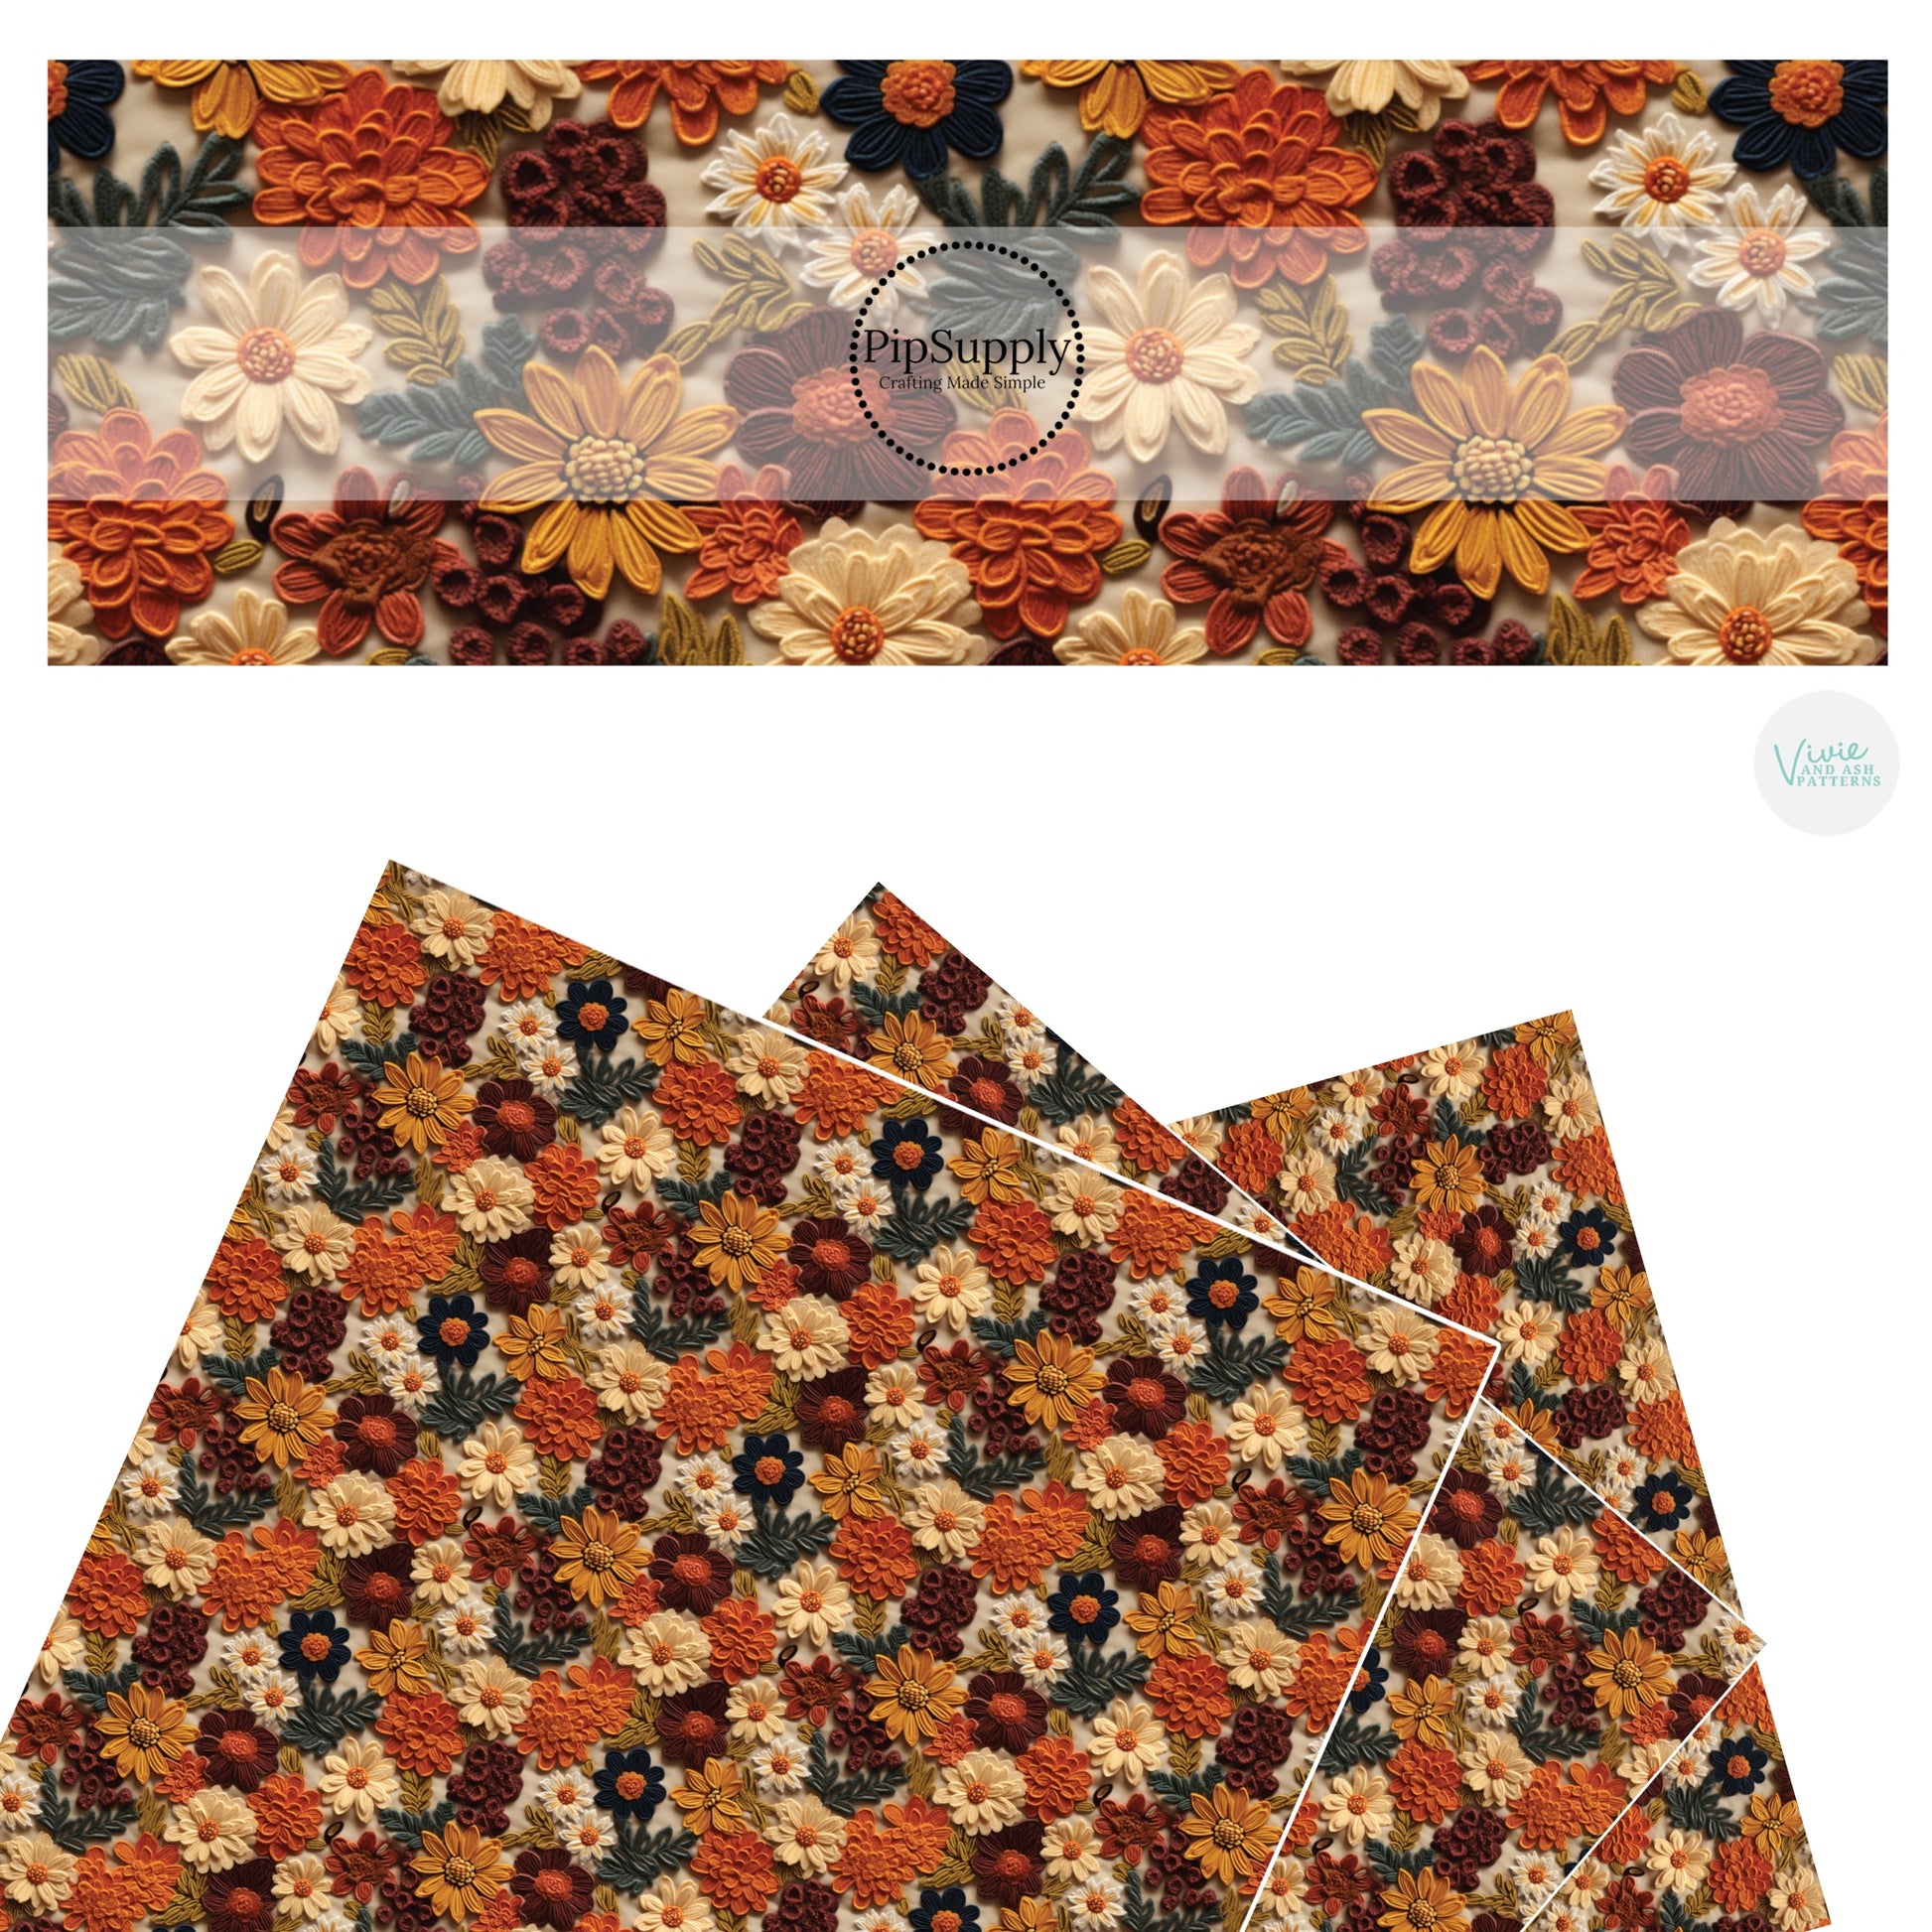 Orange, brown, cream, and yellow flowers faux leather sheets